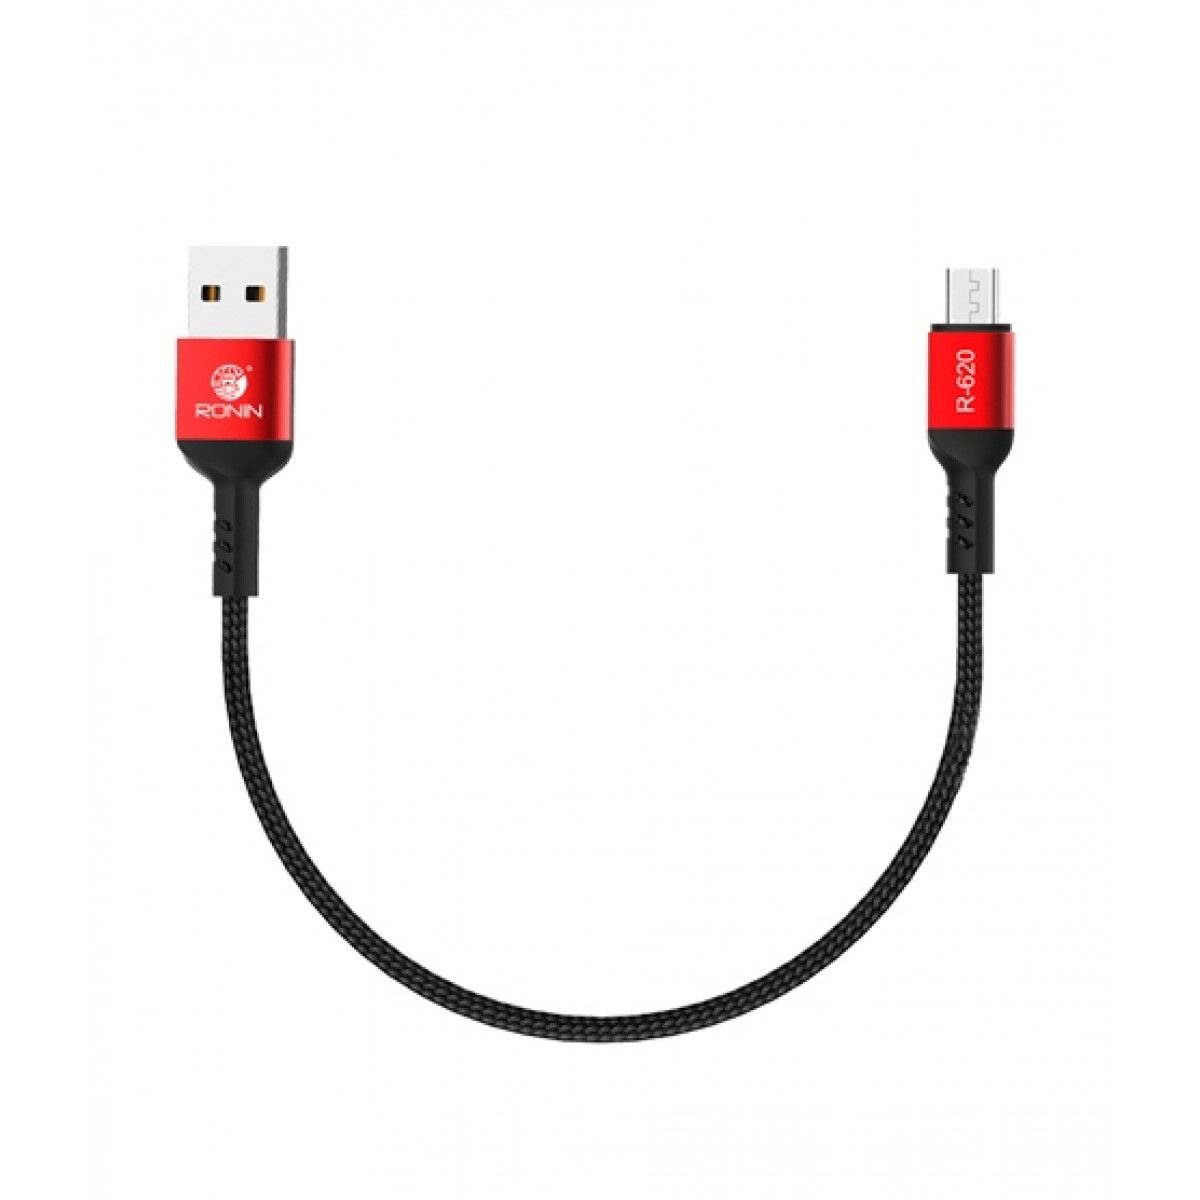 ronin-powerbank-mini-cable-for-android-black-_r-620_